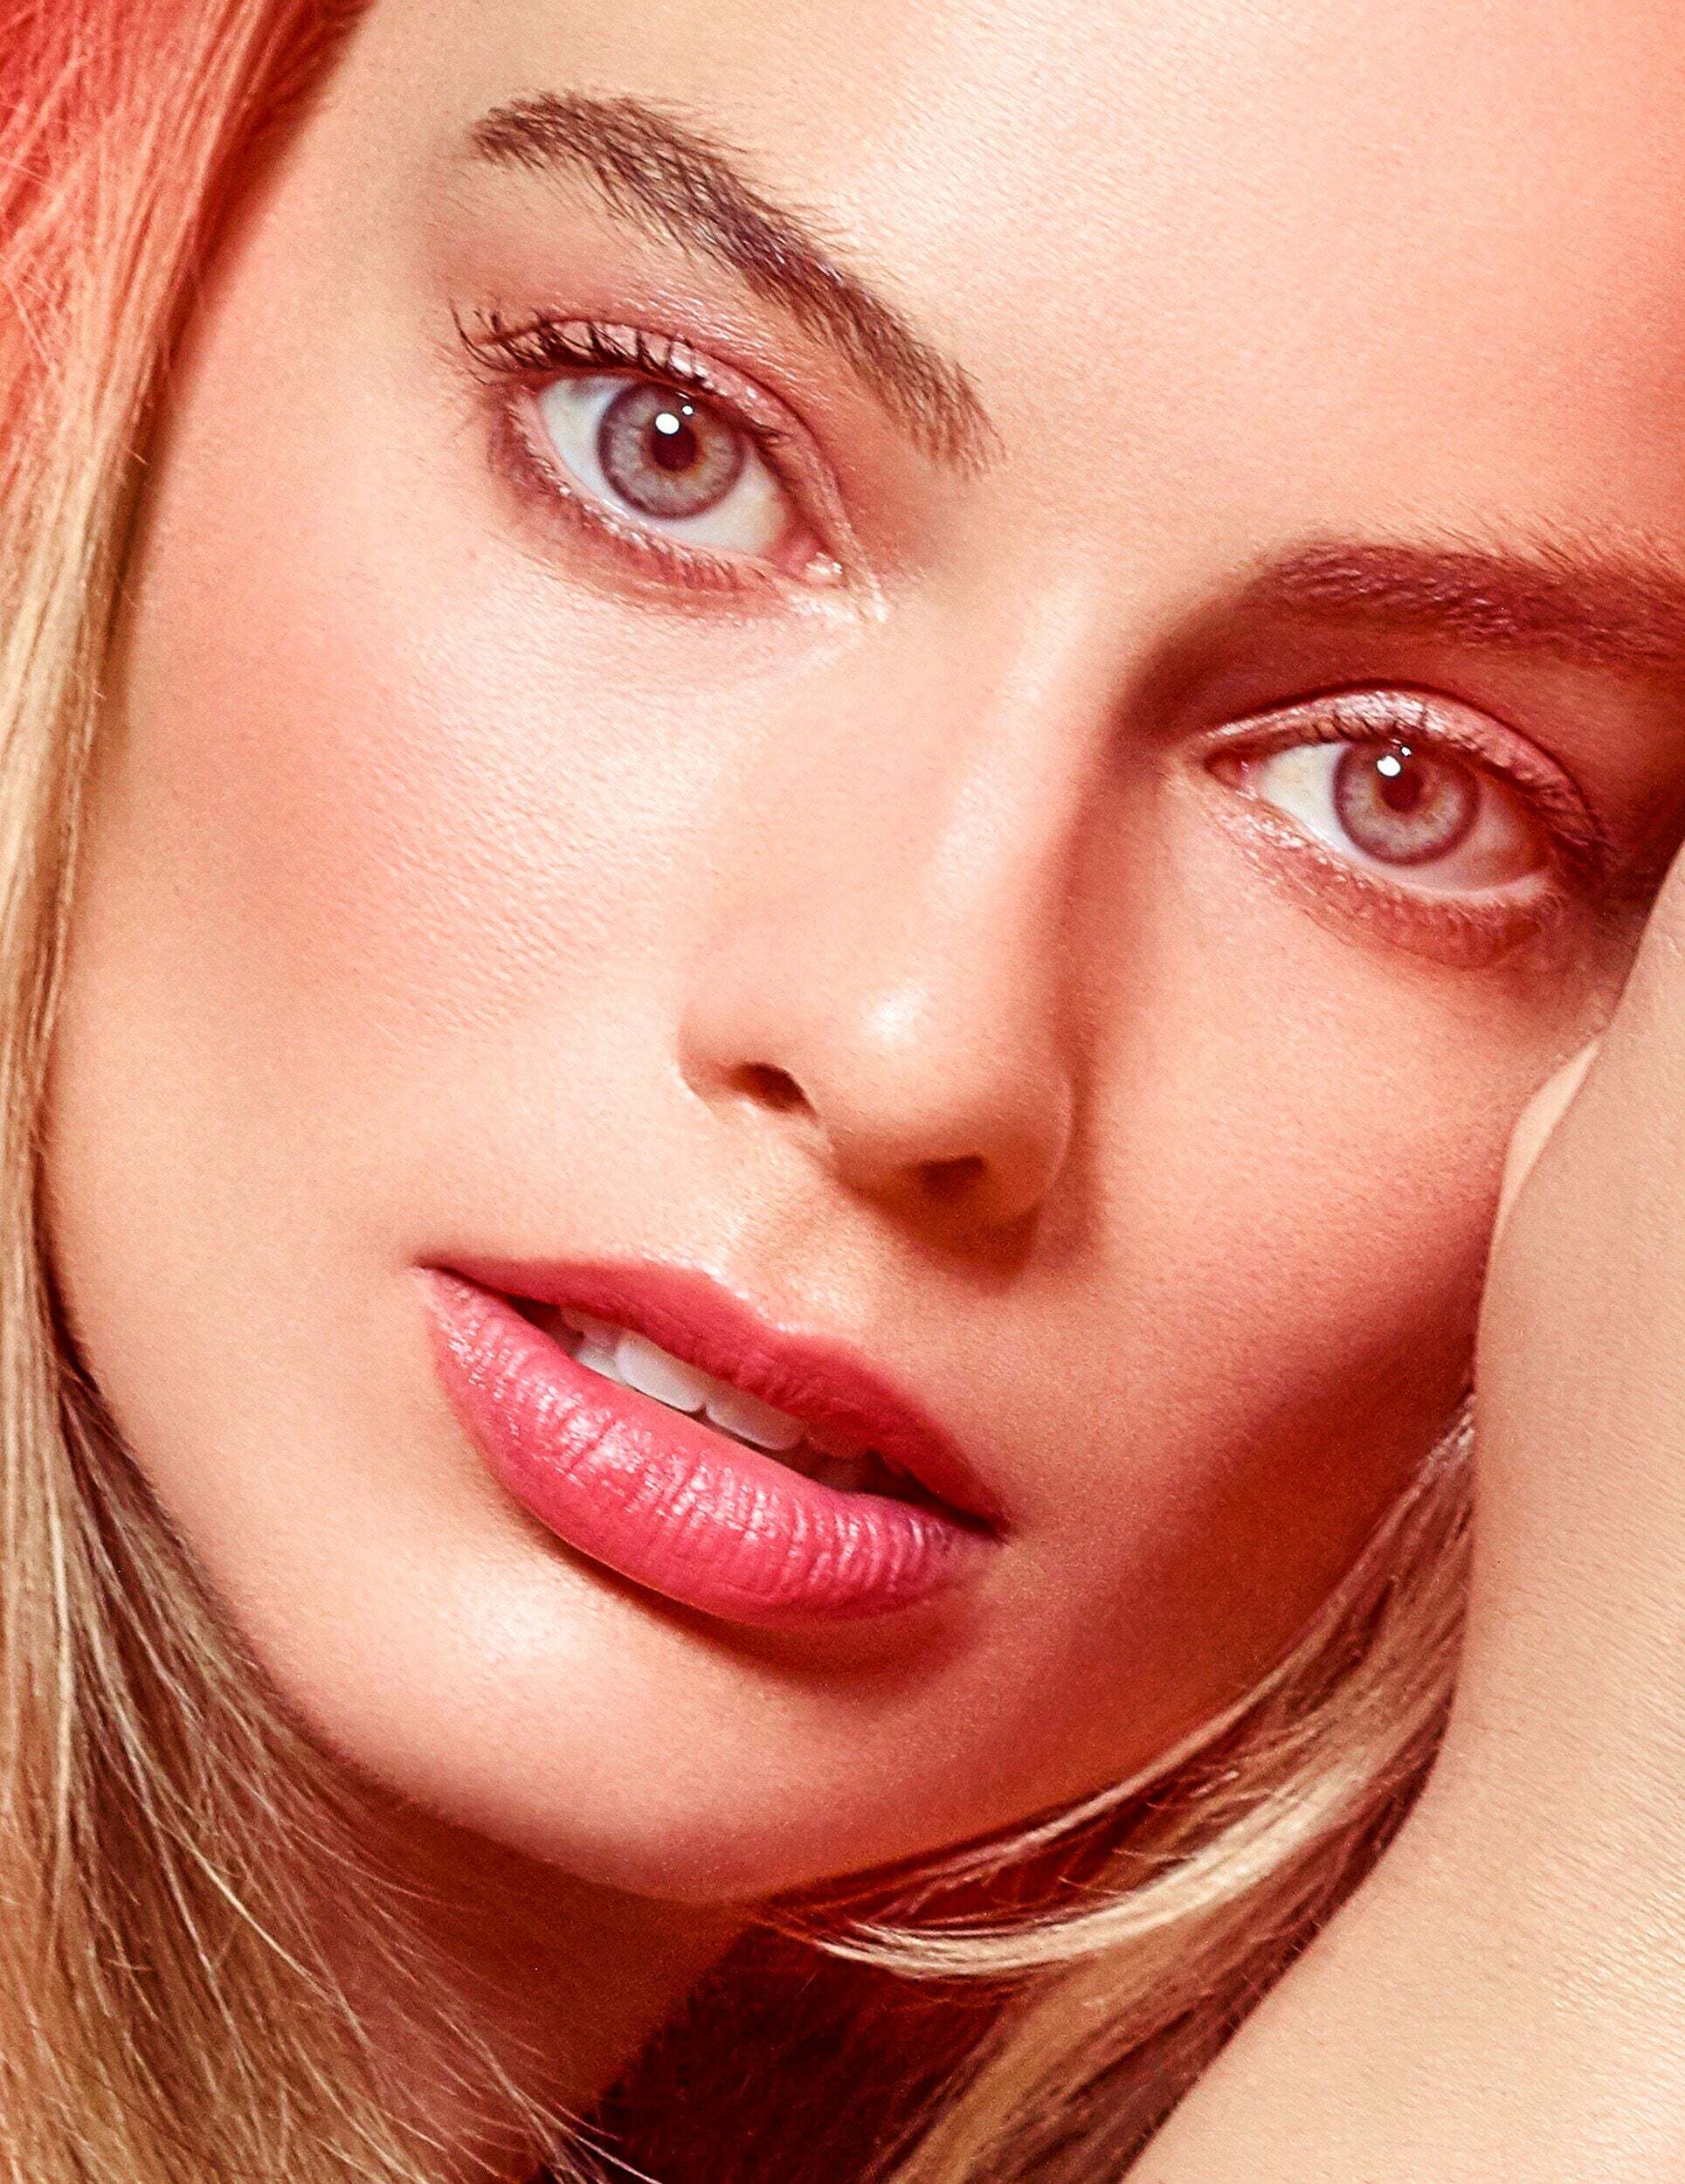 Imagine facefucking Margot Robbie and then dumping a load on her face